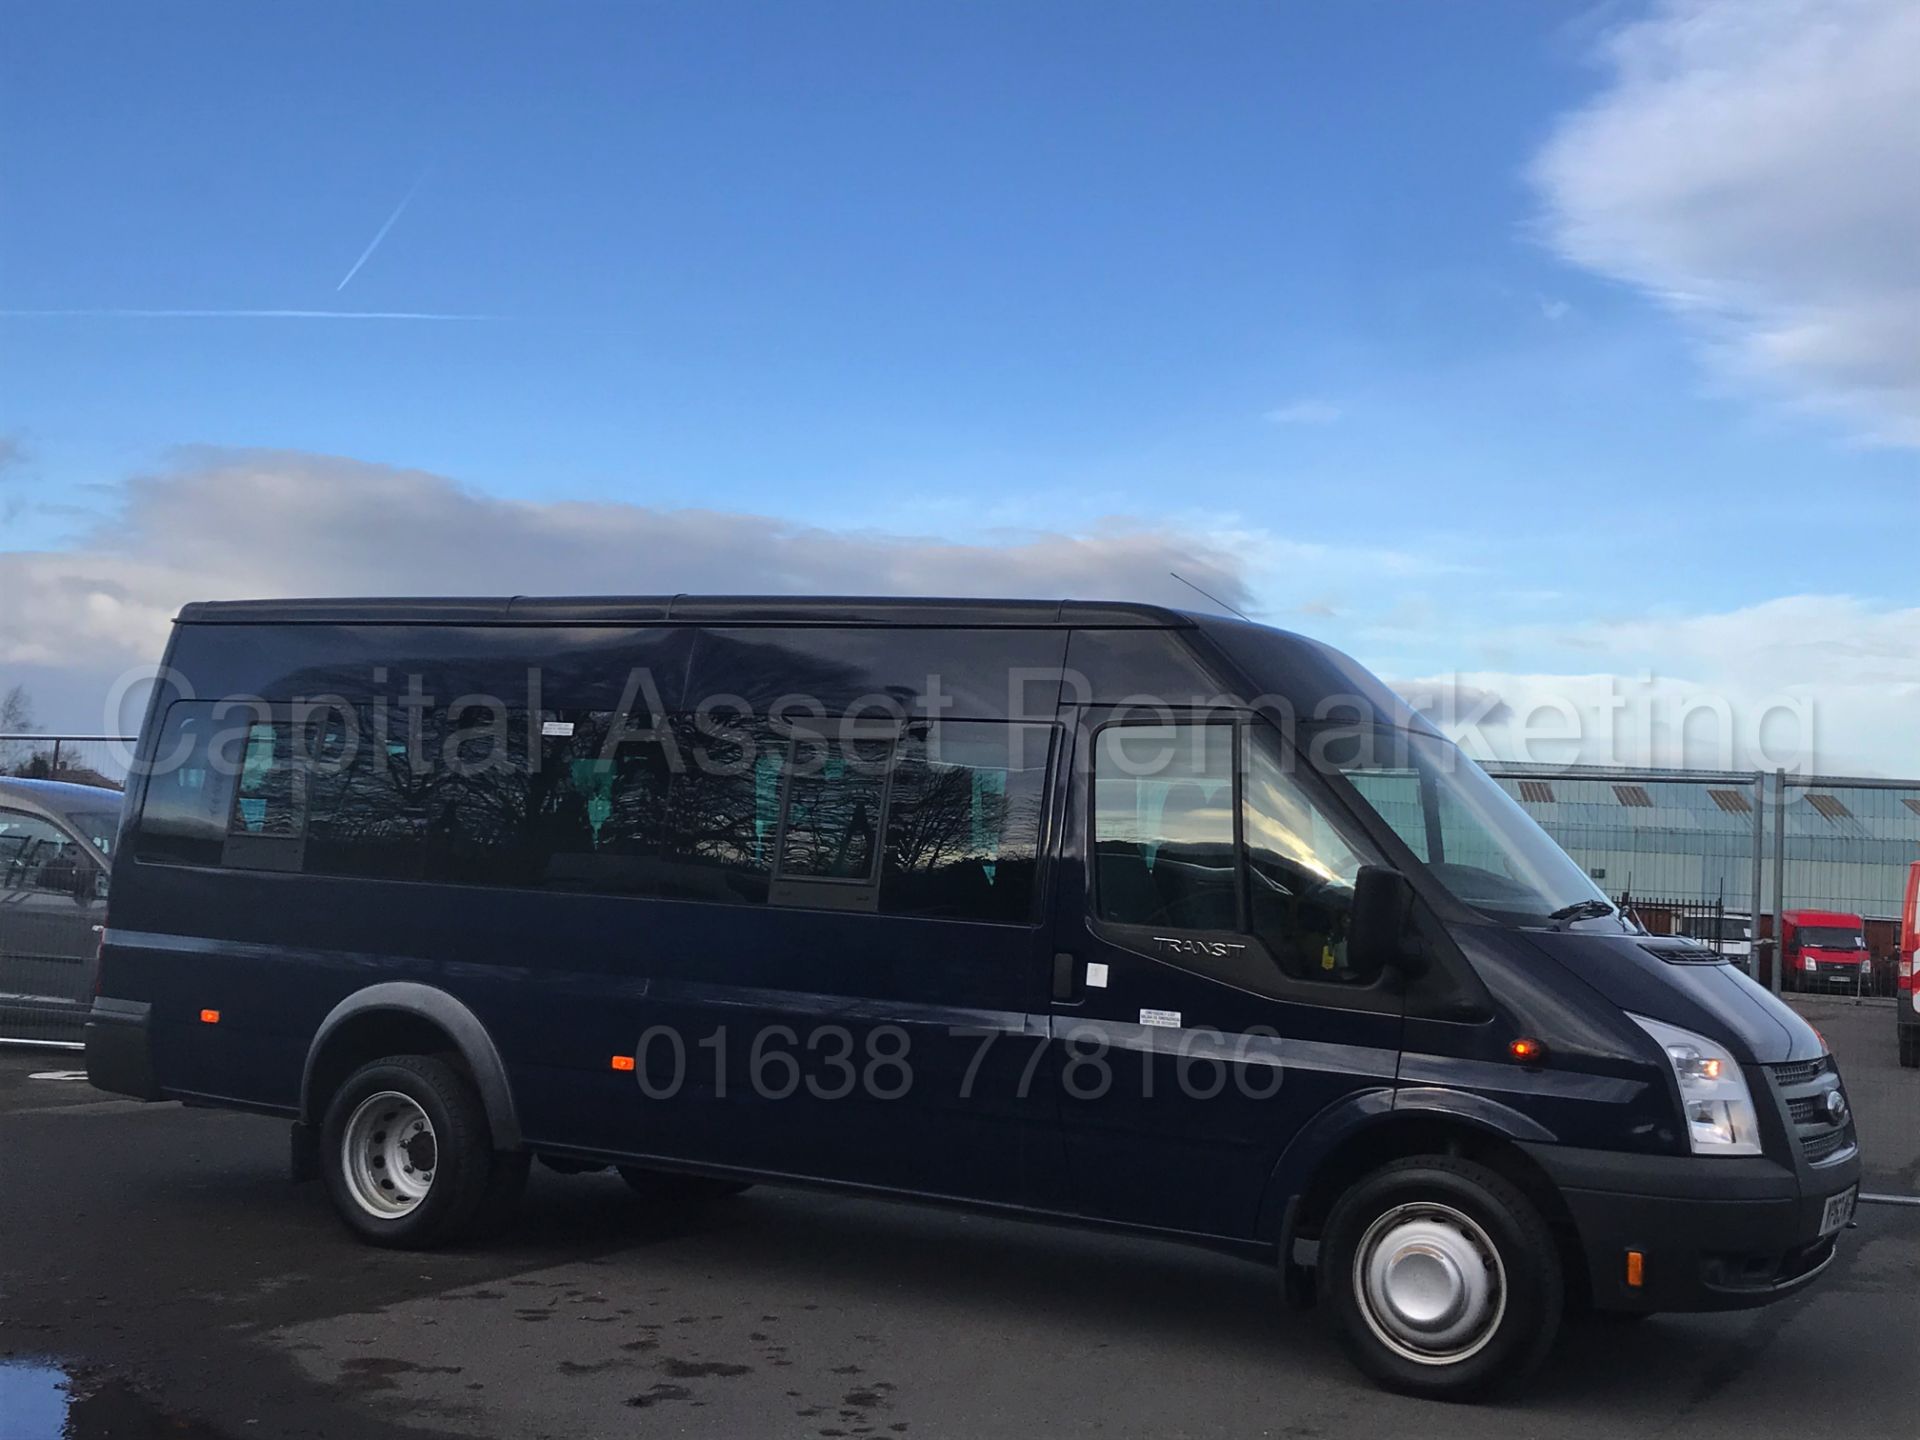 (On Sale) FORD TRANSIT 135 T430 'XLWB -17 SEATER MINI-BUS' (2014 MODEL) '1 OWNER' *5,000 MILES ONLY* - Image 11 of 36